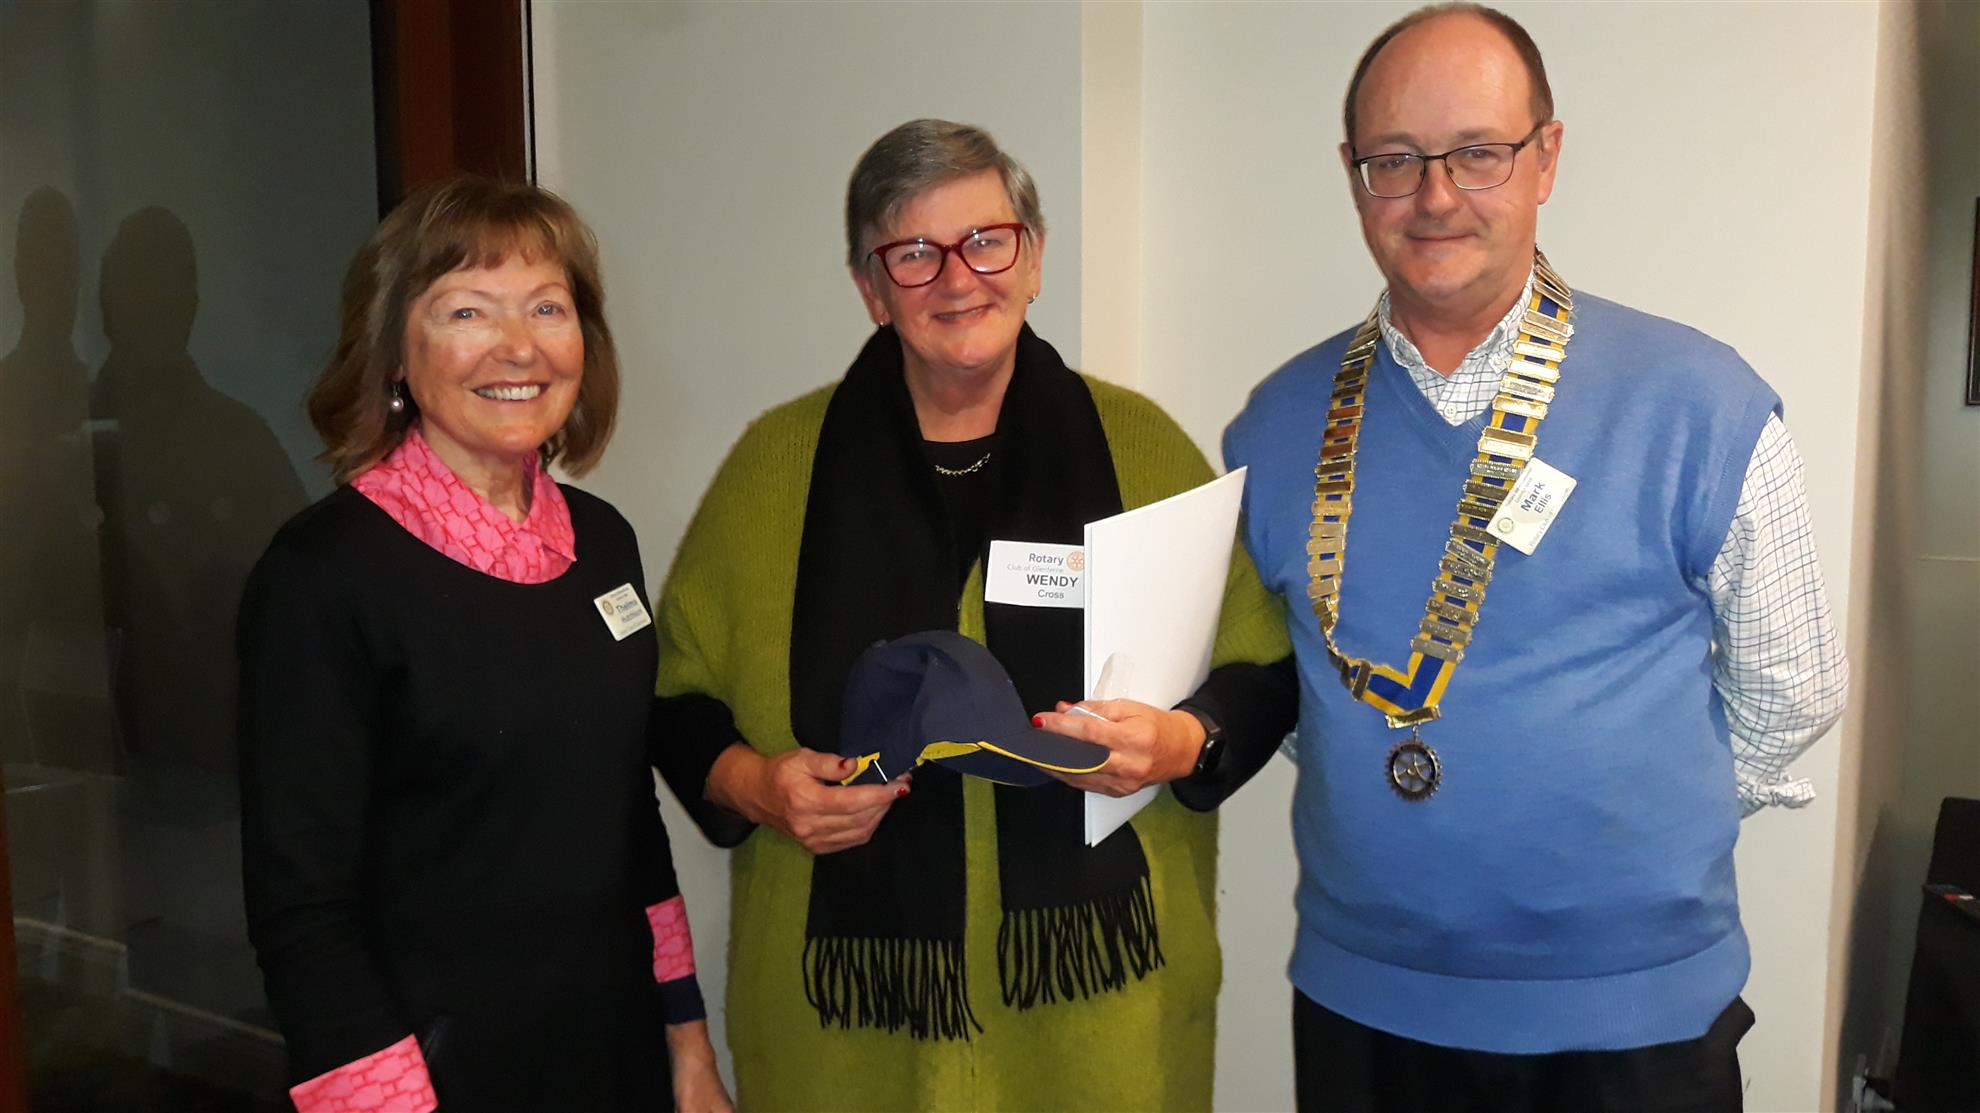 Welcome to Rotary Wendy Cross | Rotary Club of Glenferrie